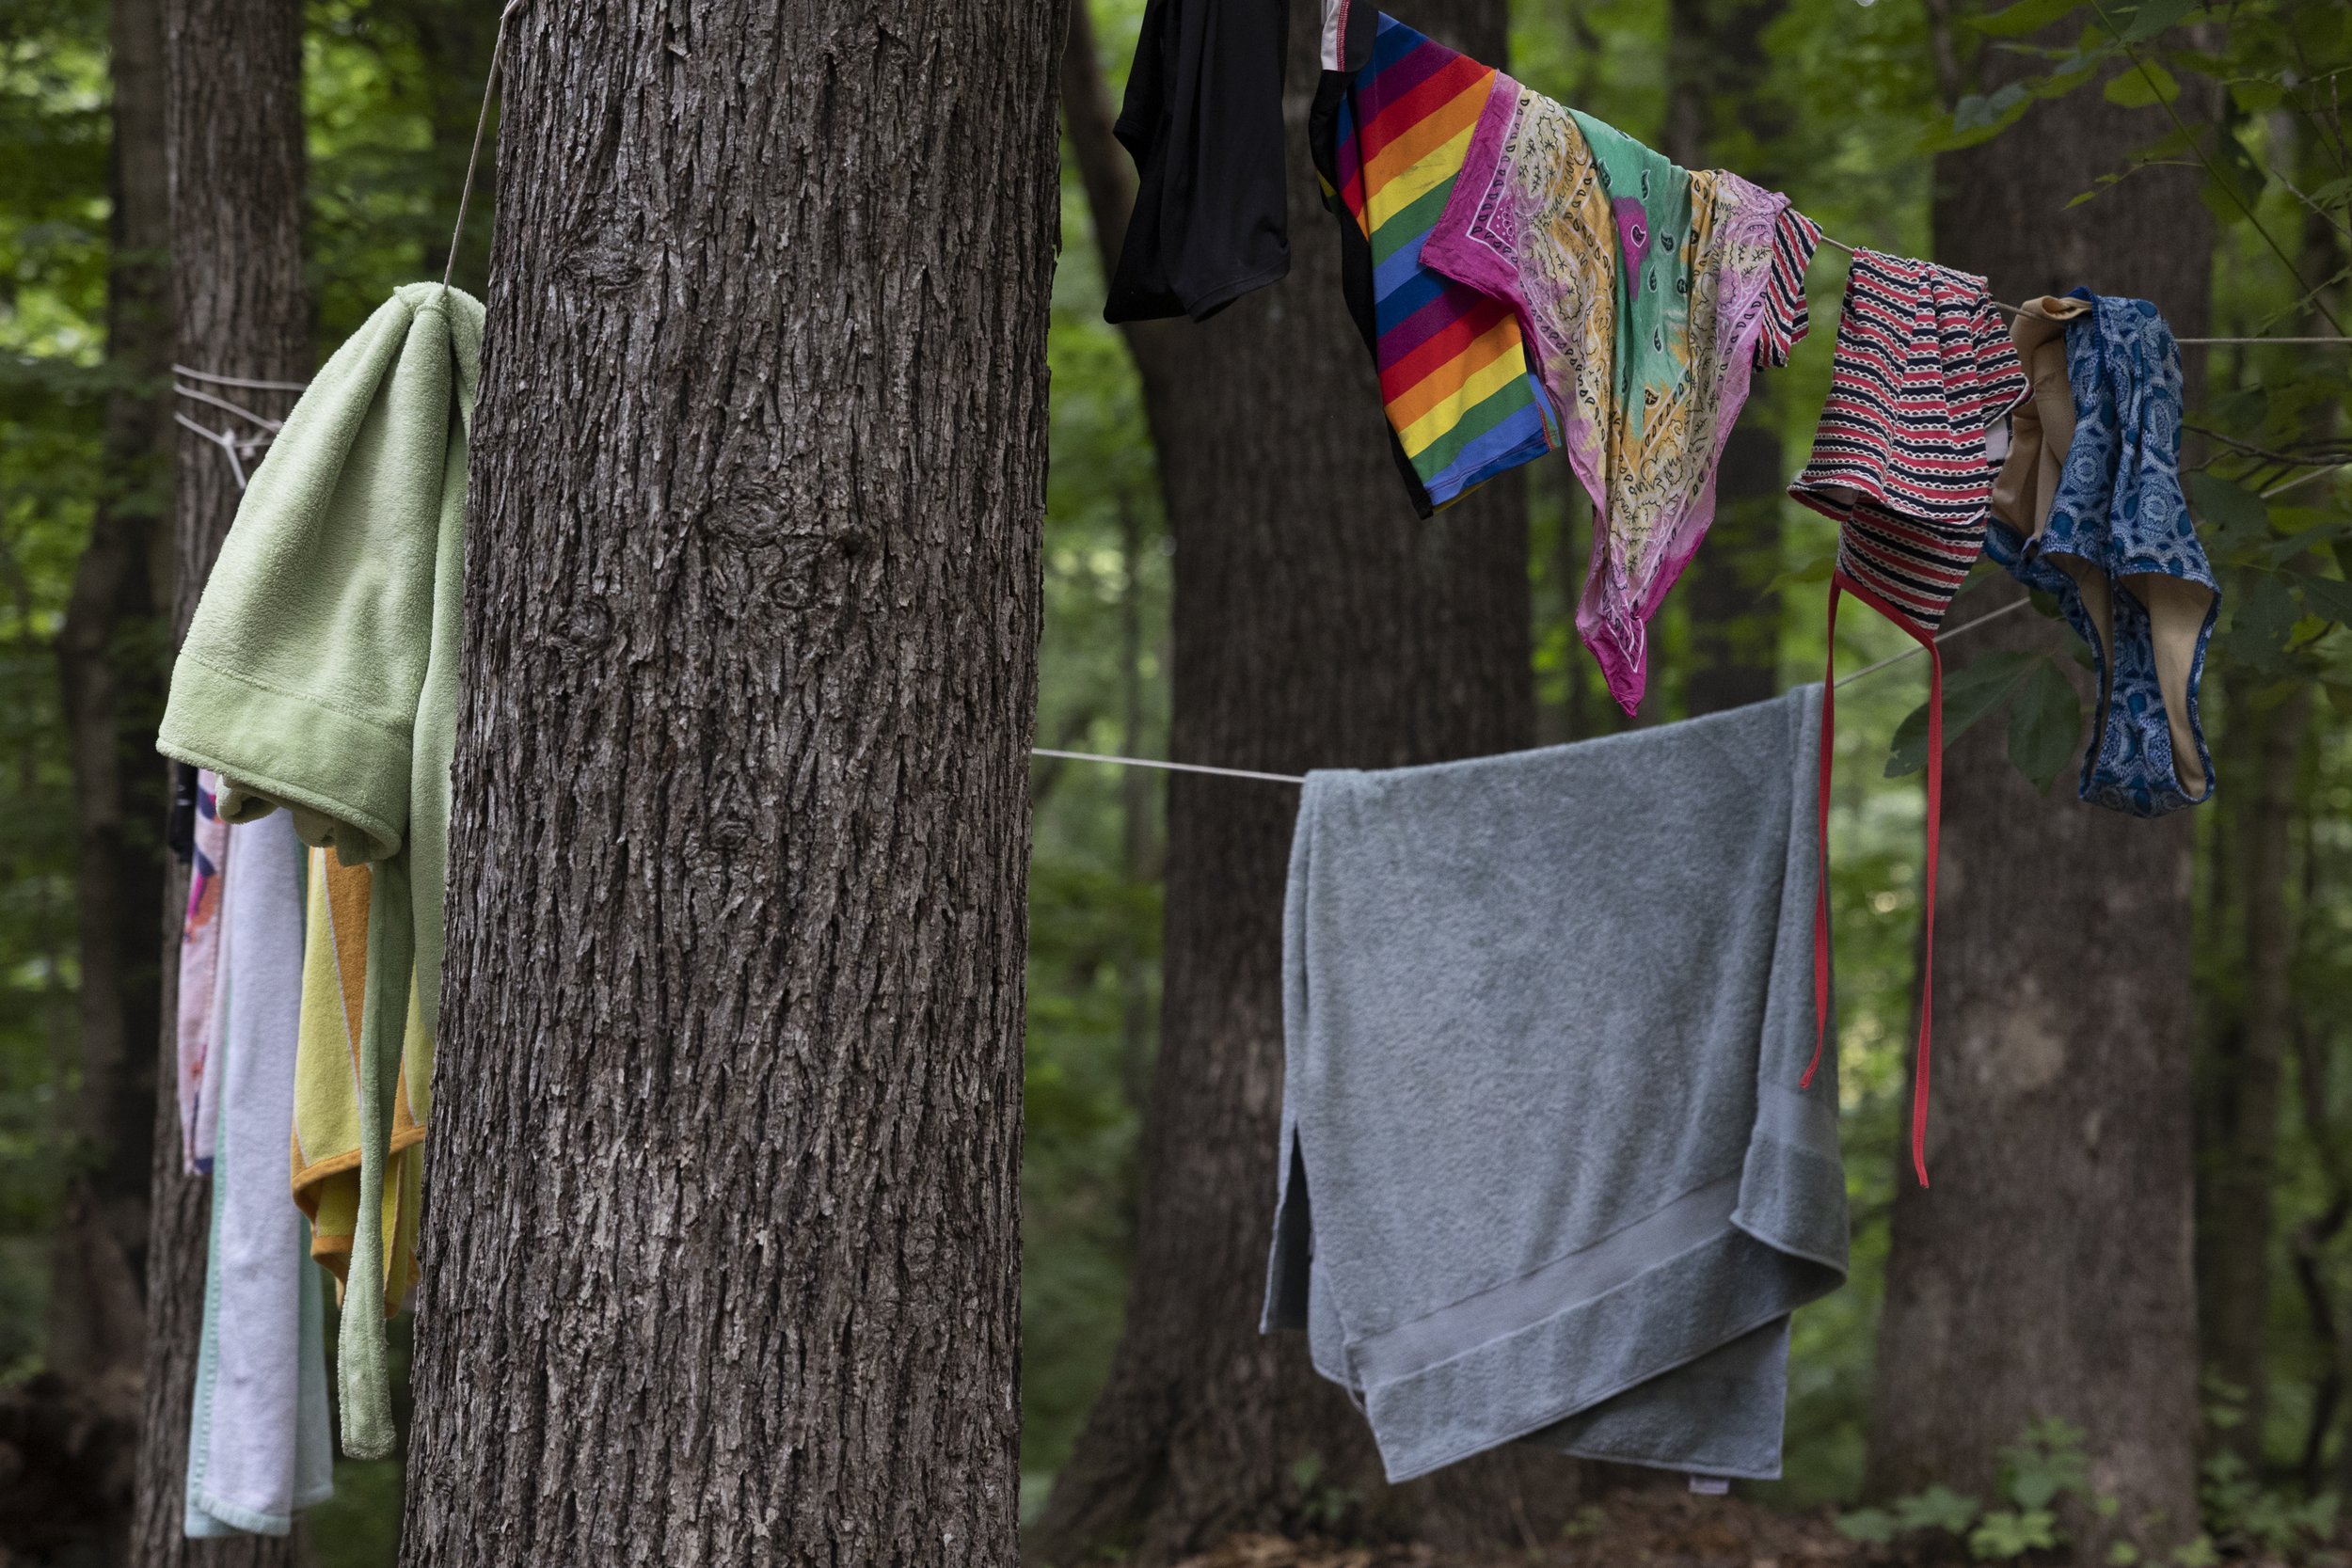  Wet bathing suits and towels are strung up to dry at the middle school bunks. 